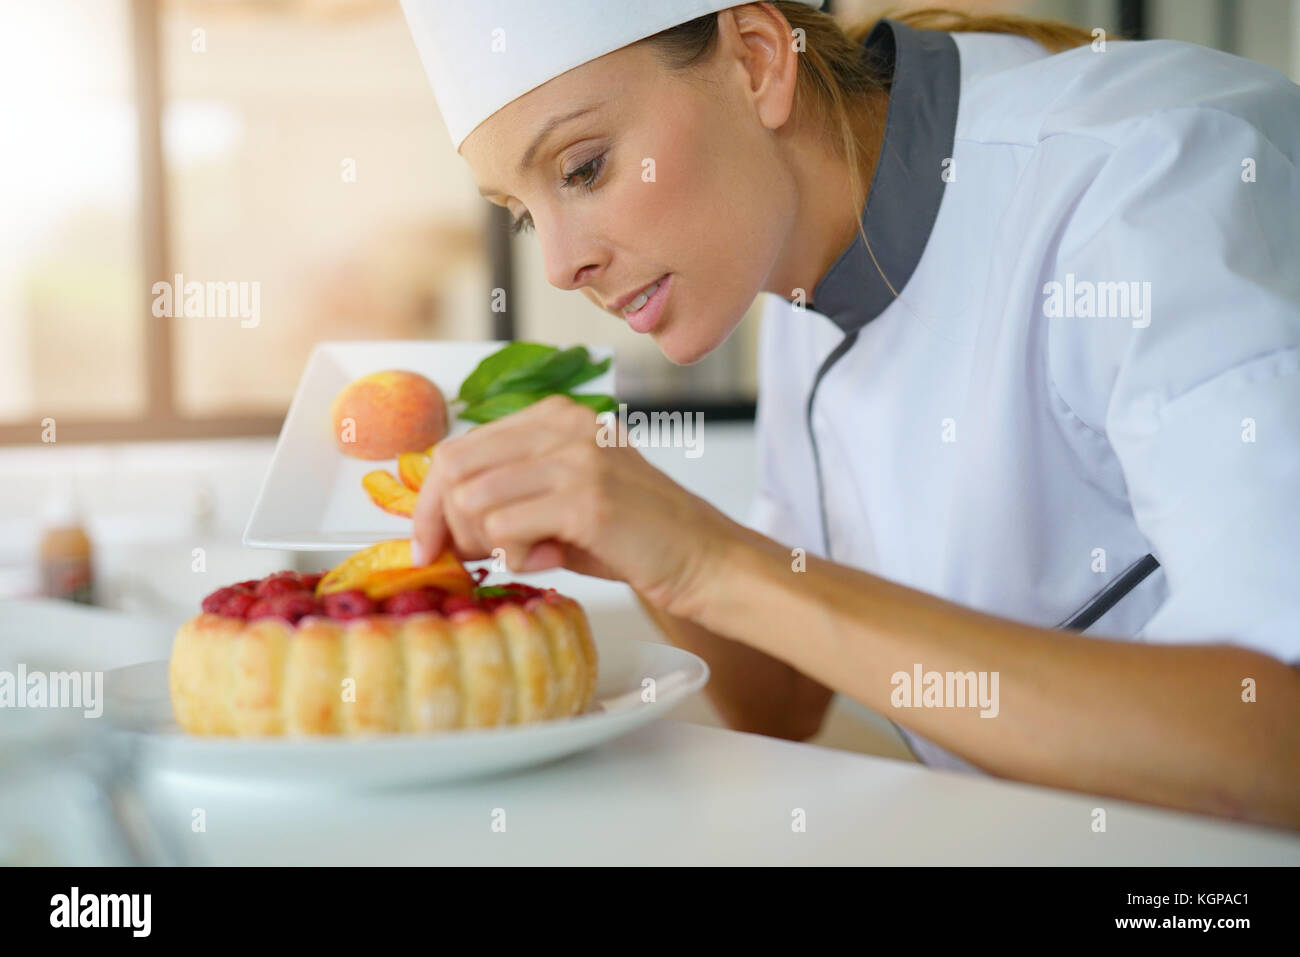 Pastry chef in professional kitchen decorating raspberry cake with fruits Stock Photo